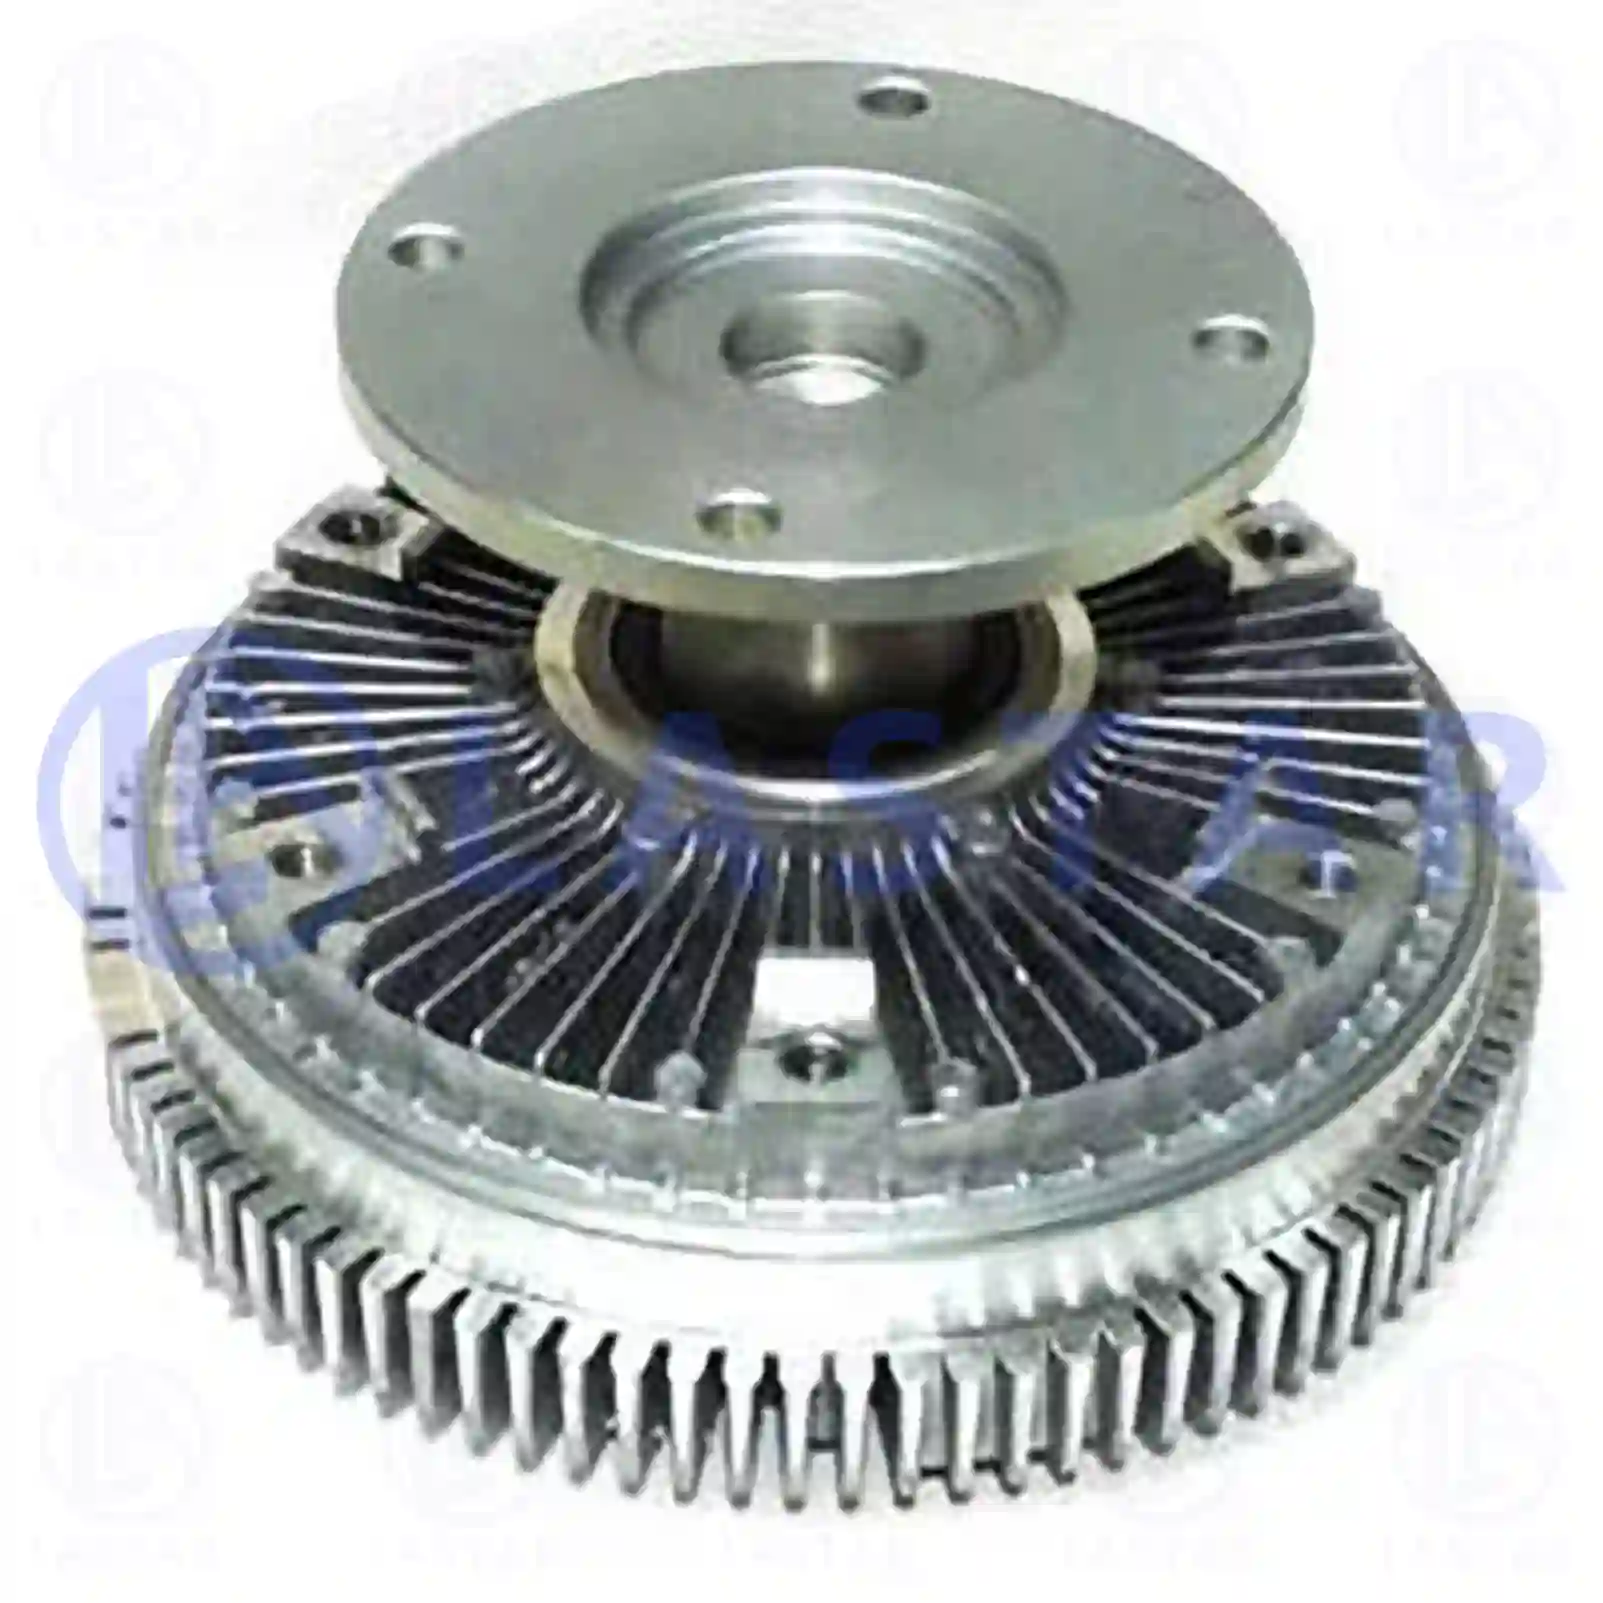 Fan clutch, 77709258, 500342517, 500342 ||  77709258 Lastar Spare Part | Truck Spare Parts, Auotomotive Spare Parts Fan clutch, 77709258, 500342517, 500342 ||  77709258 Lastar Spare Part | Truck Spare Parts, Auotomotive Spare Parts